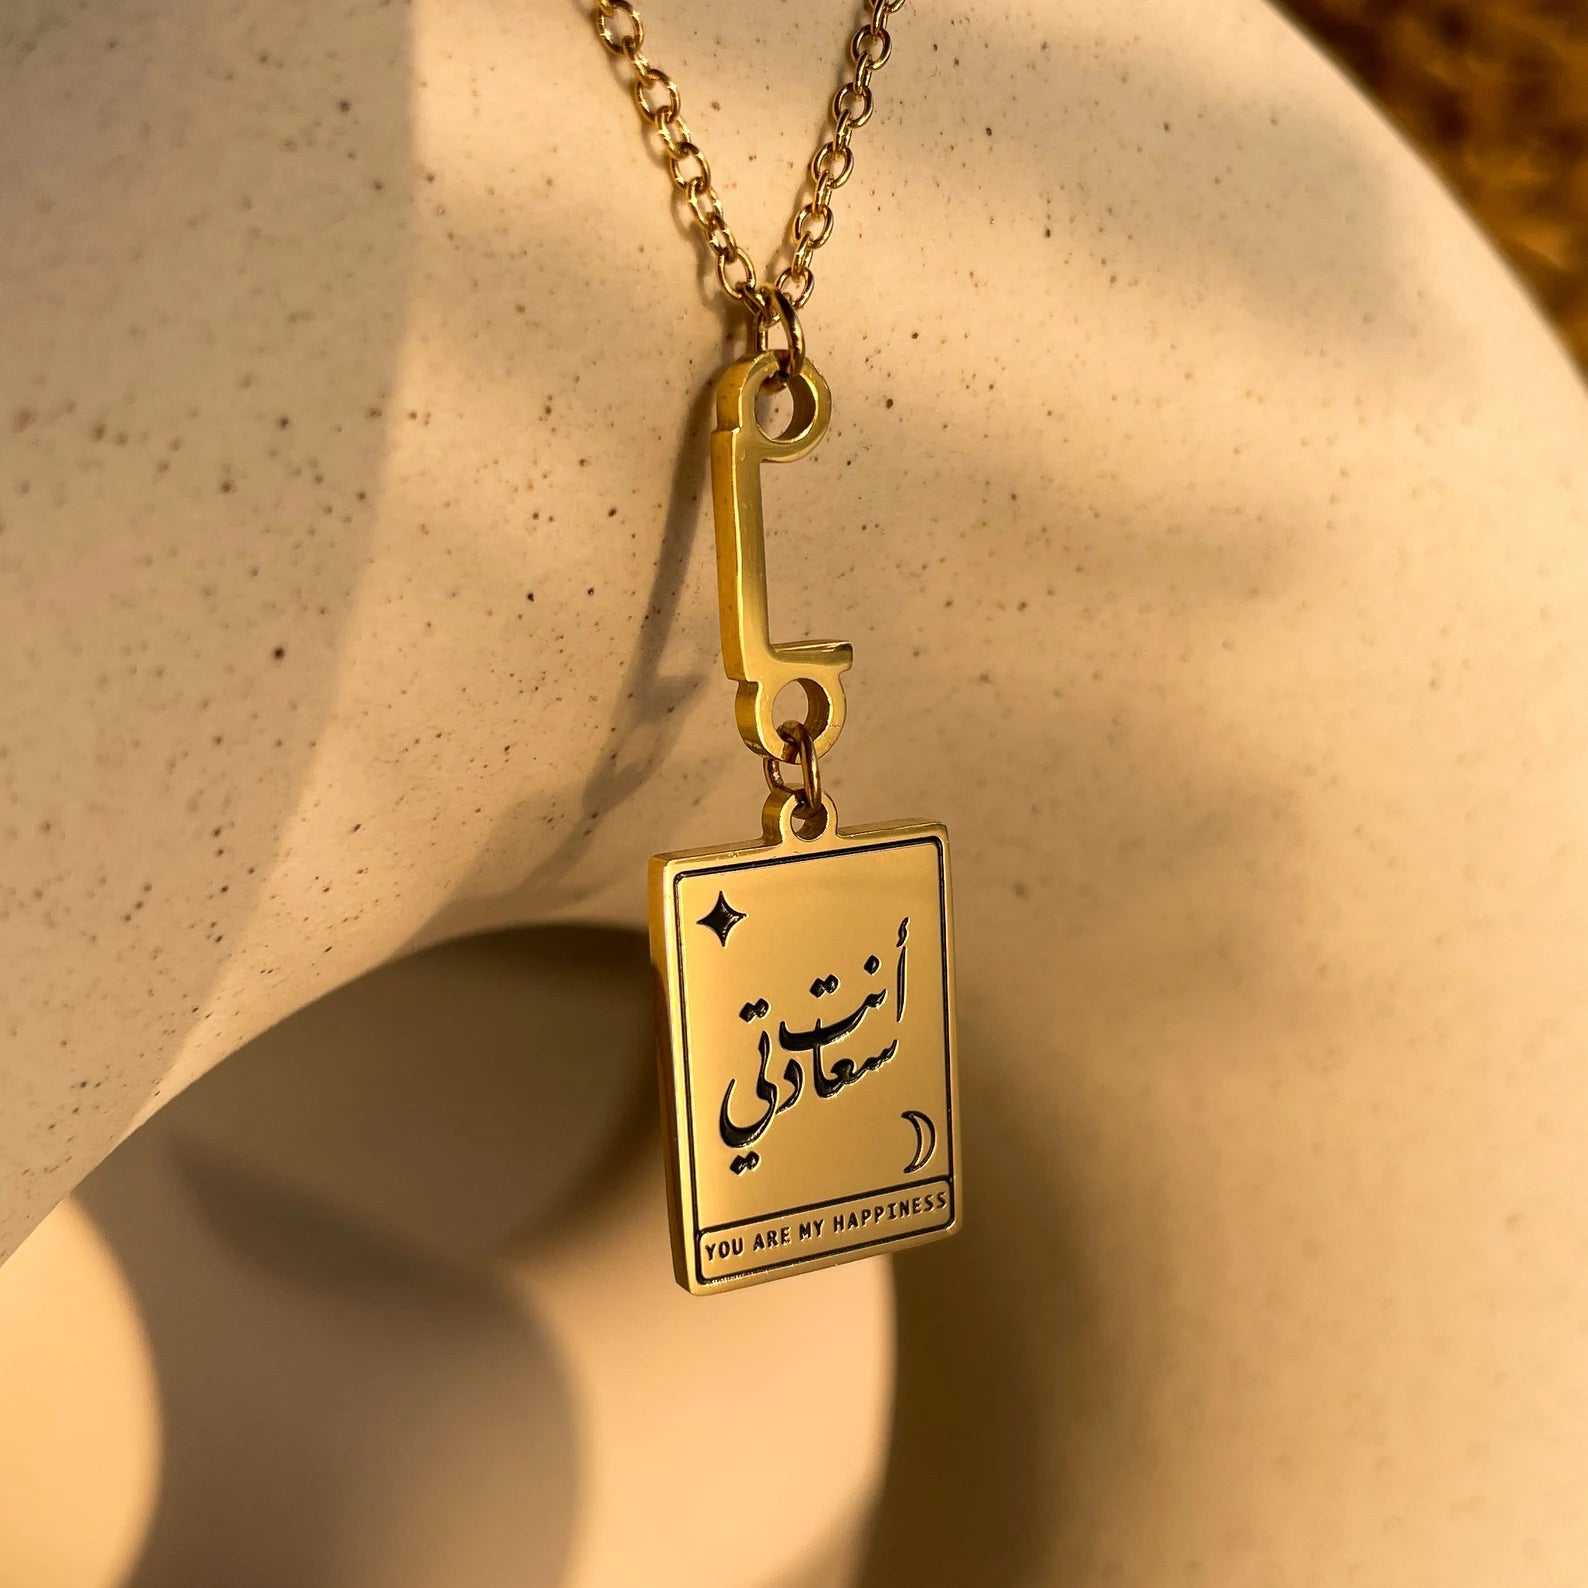 Gold Name Pendant with Initial made in real gold. Designed and handcrafted in the UAE. This unique Gold Name Pendant with Initial is locally handcrafted with the highest quality materials and artisans available in Dubai.